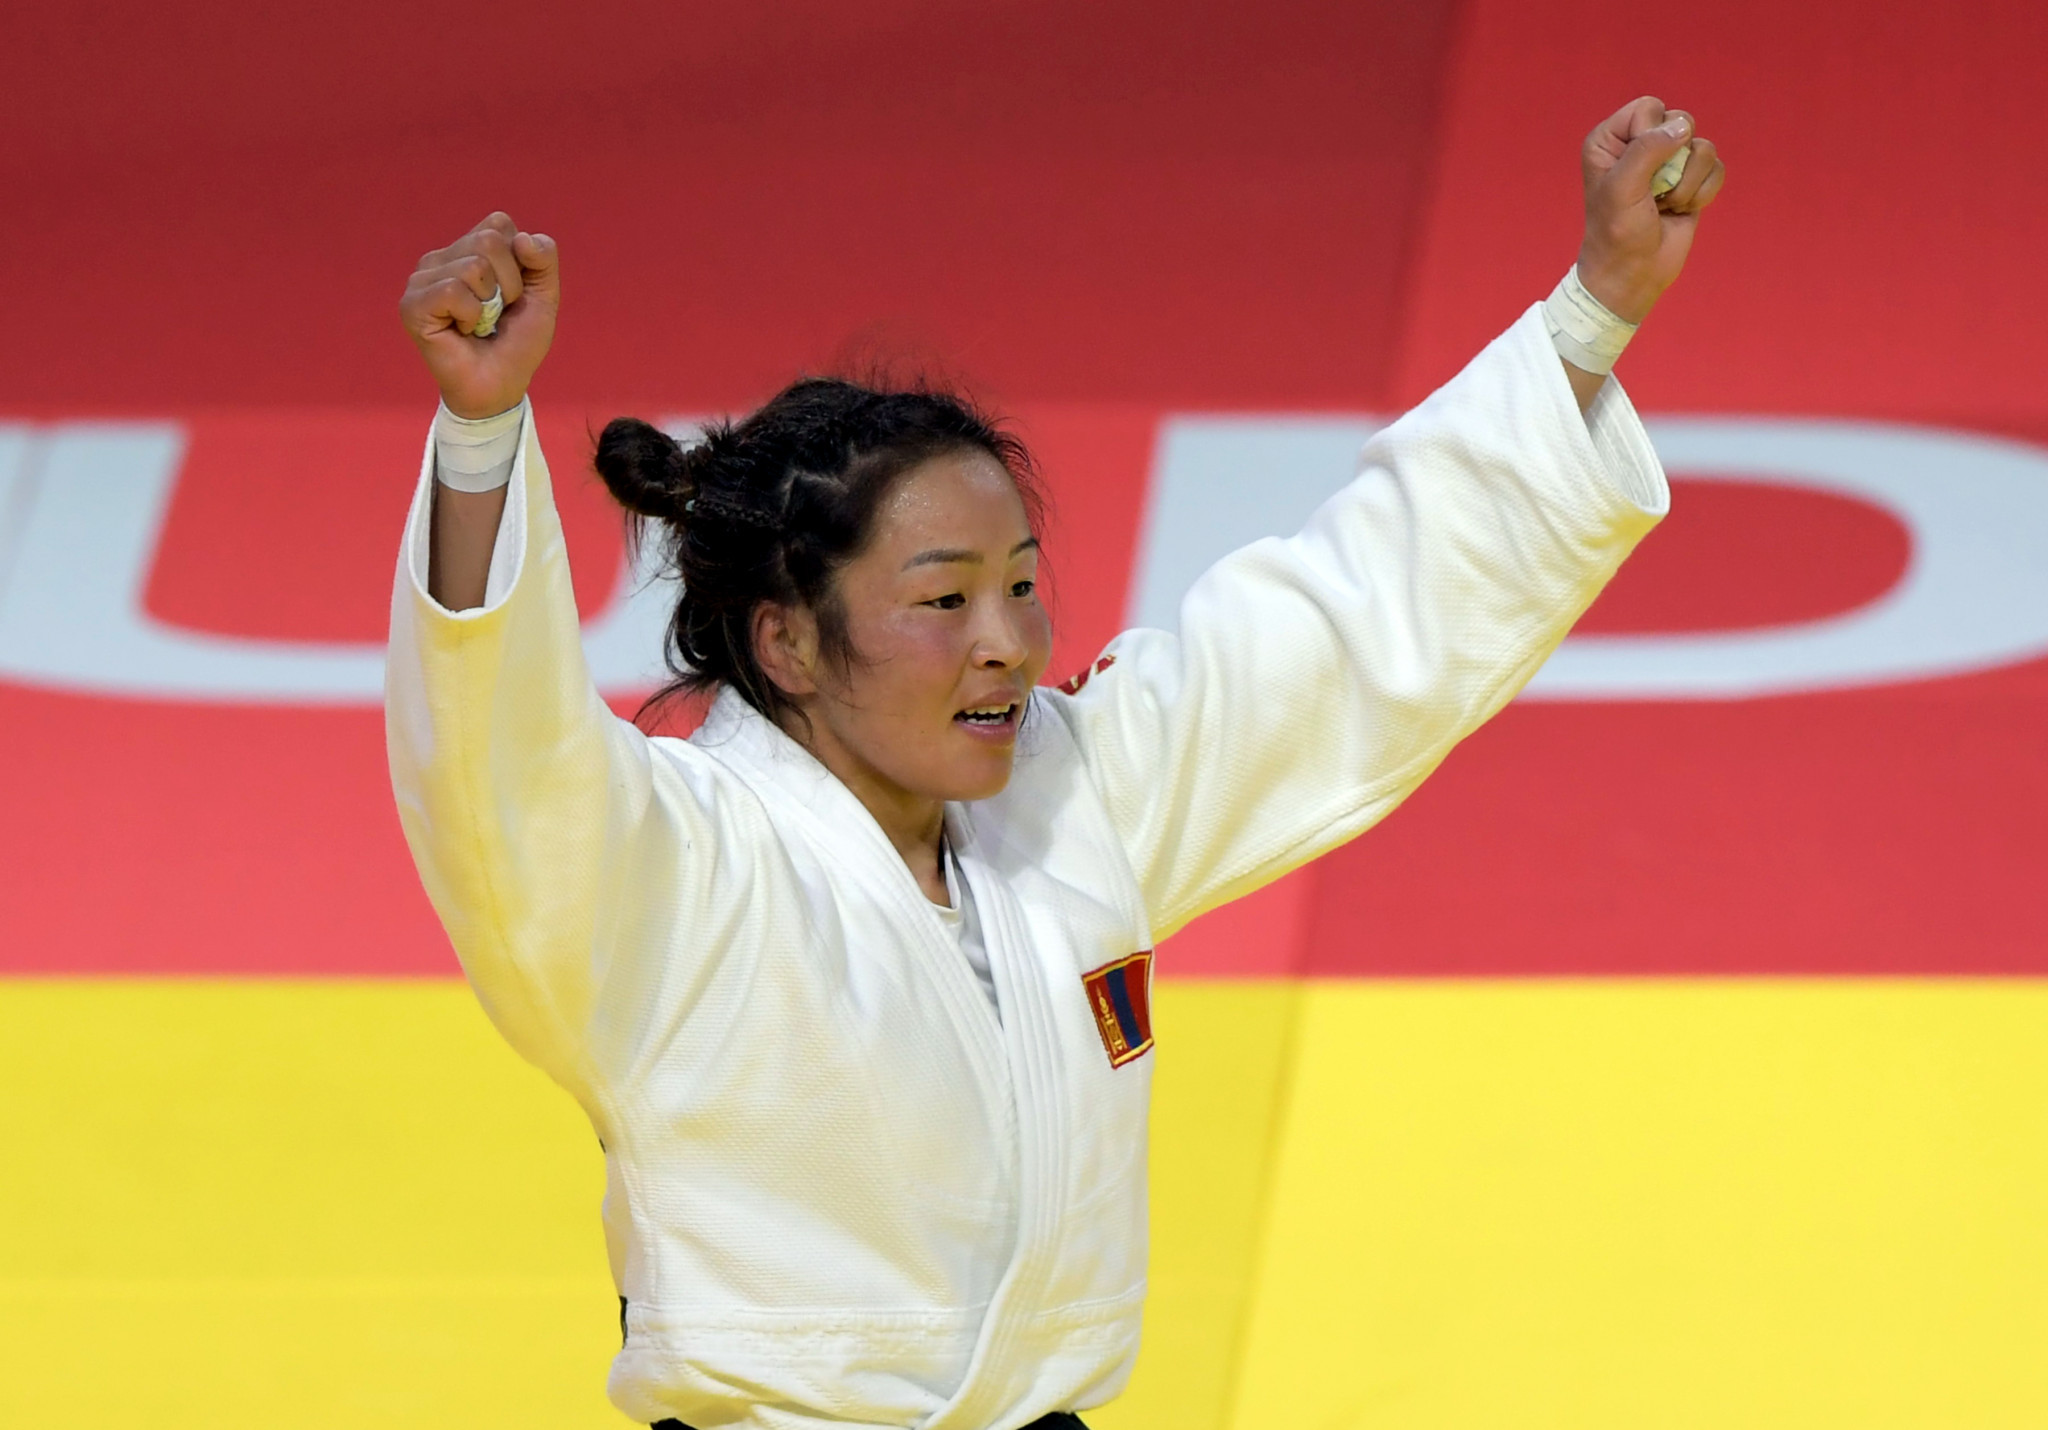 Sumiya Dorjsuren of Mongolia finished with the highest points total across all seven women's weight categories following a superb 2017 ©Getty Images